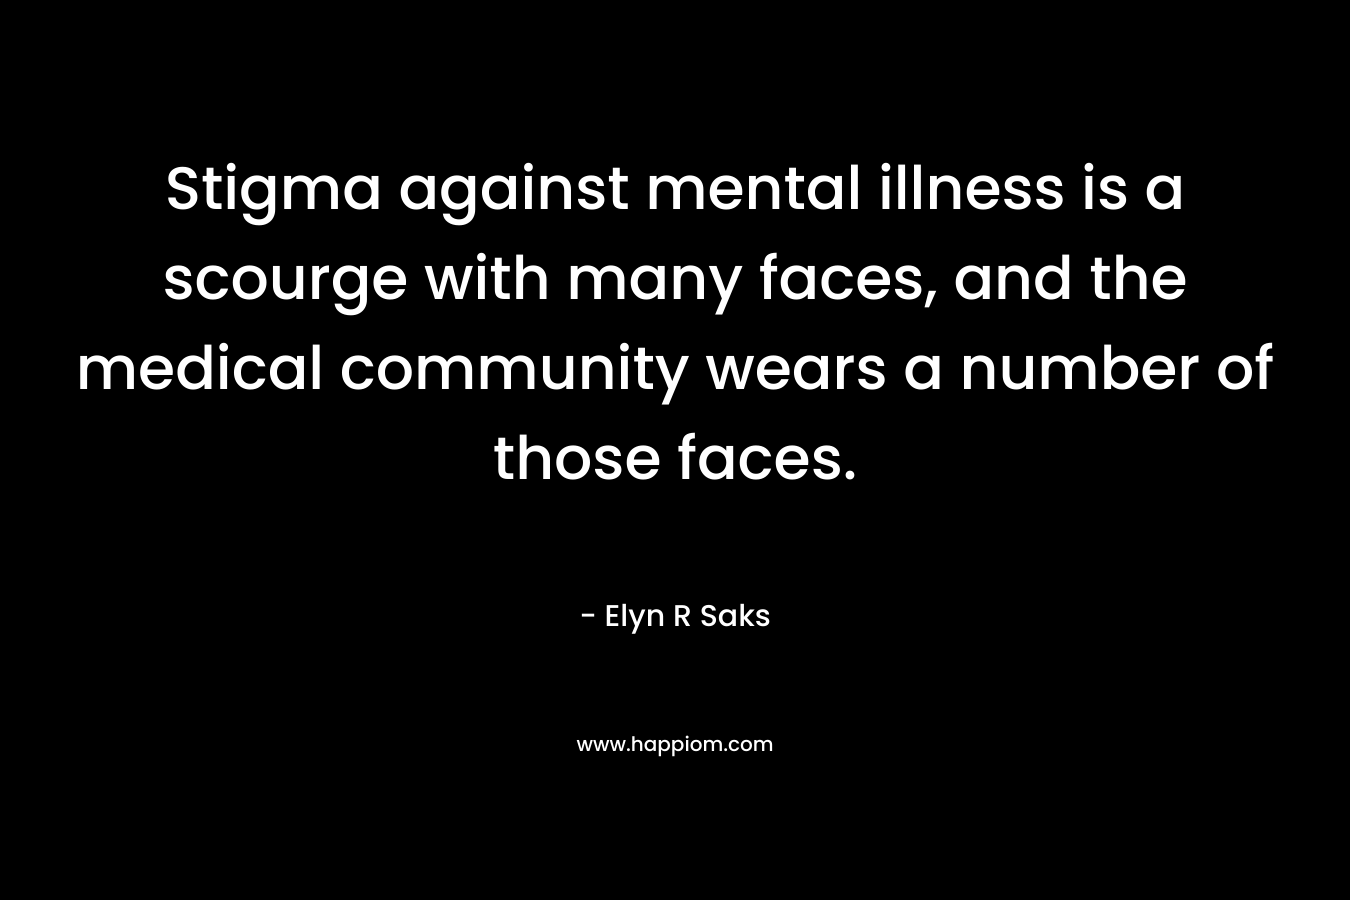 Stigma against mental illness is a scourge with many faces, and the medical community wears a number of those faces.